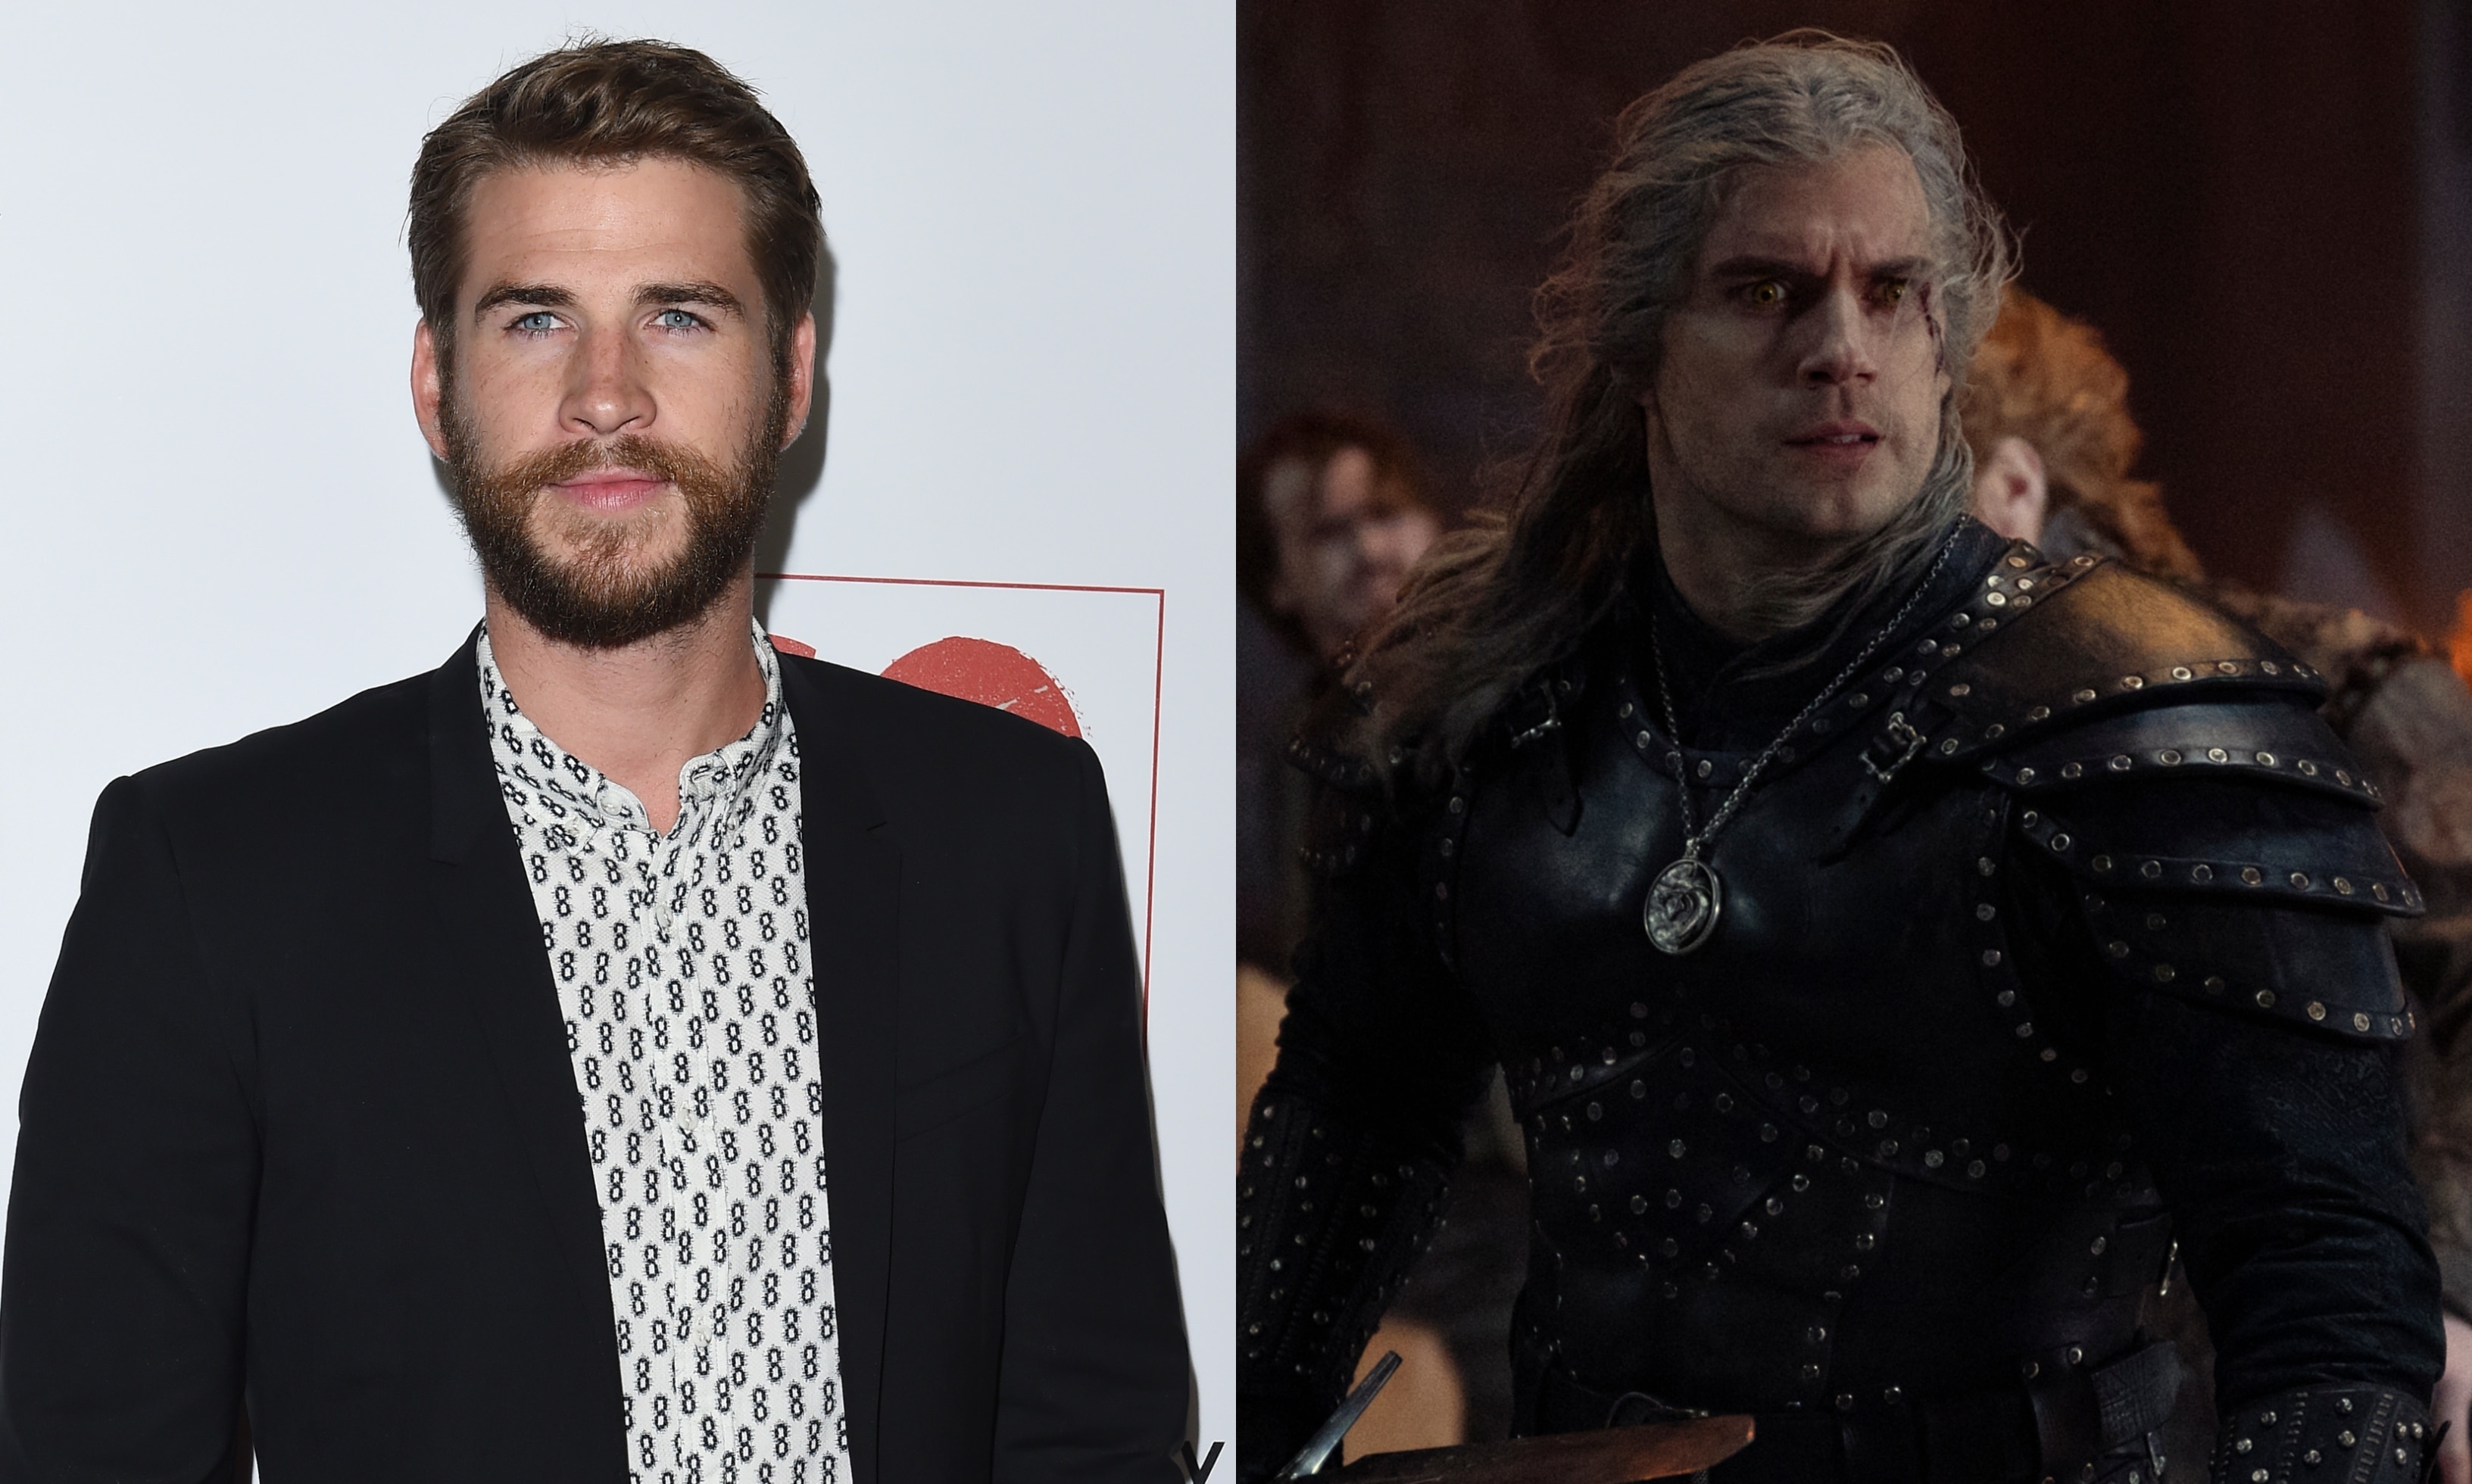 The Witcher': Liam Hemsworth Taking Over for Henry Cavill